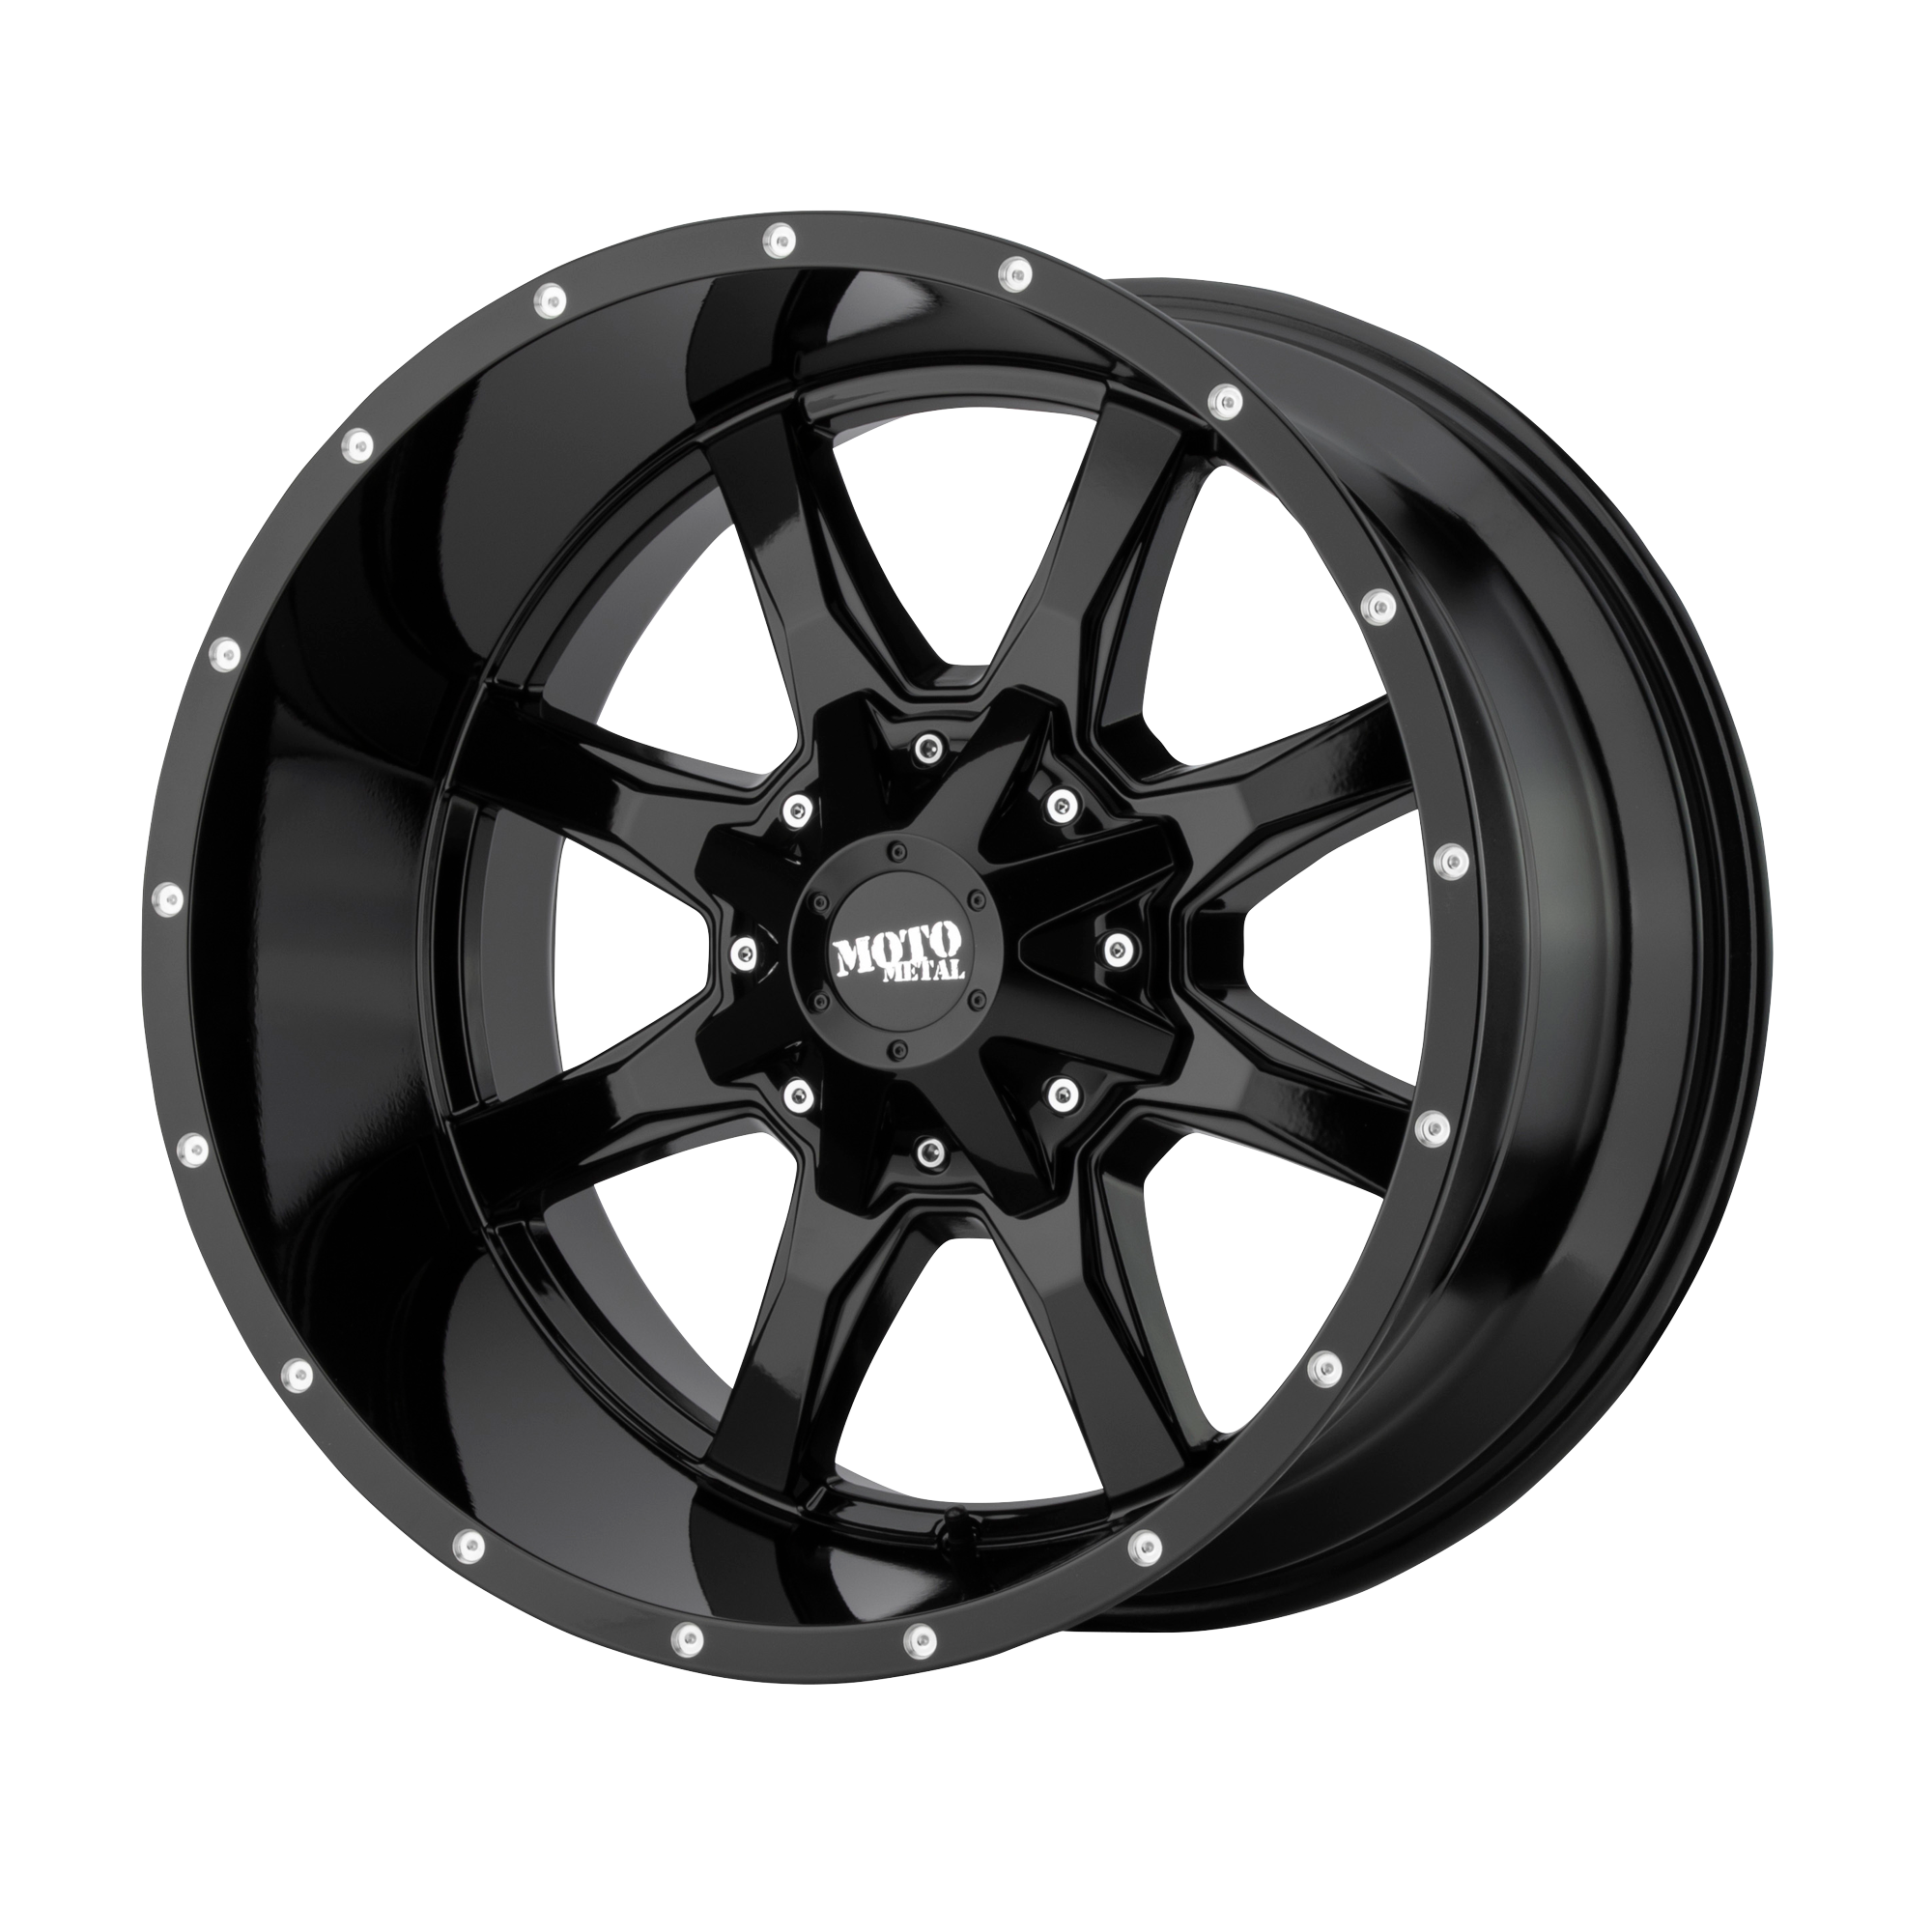 MO970 17x8 6x120.00/6x139.70 GLOSS BLACK W/ MILLED LIP (0 mm) - Tires and Engine Performance